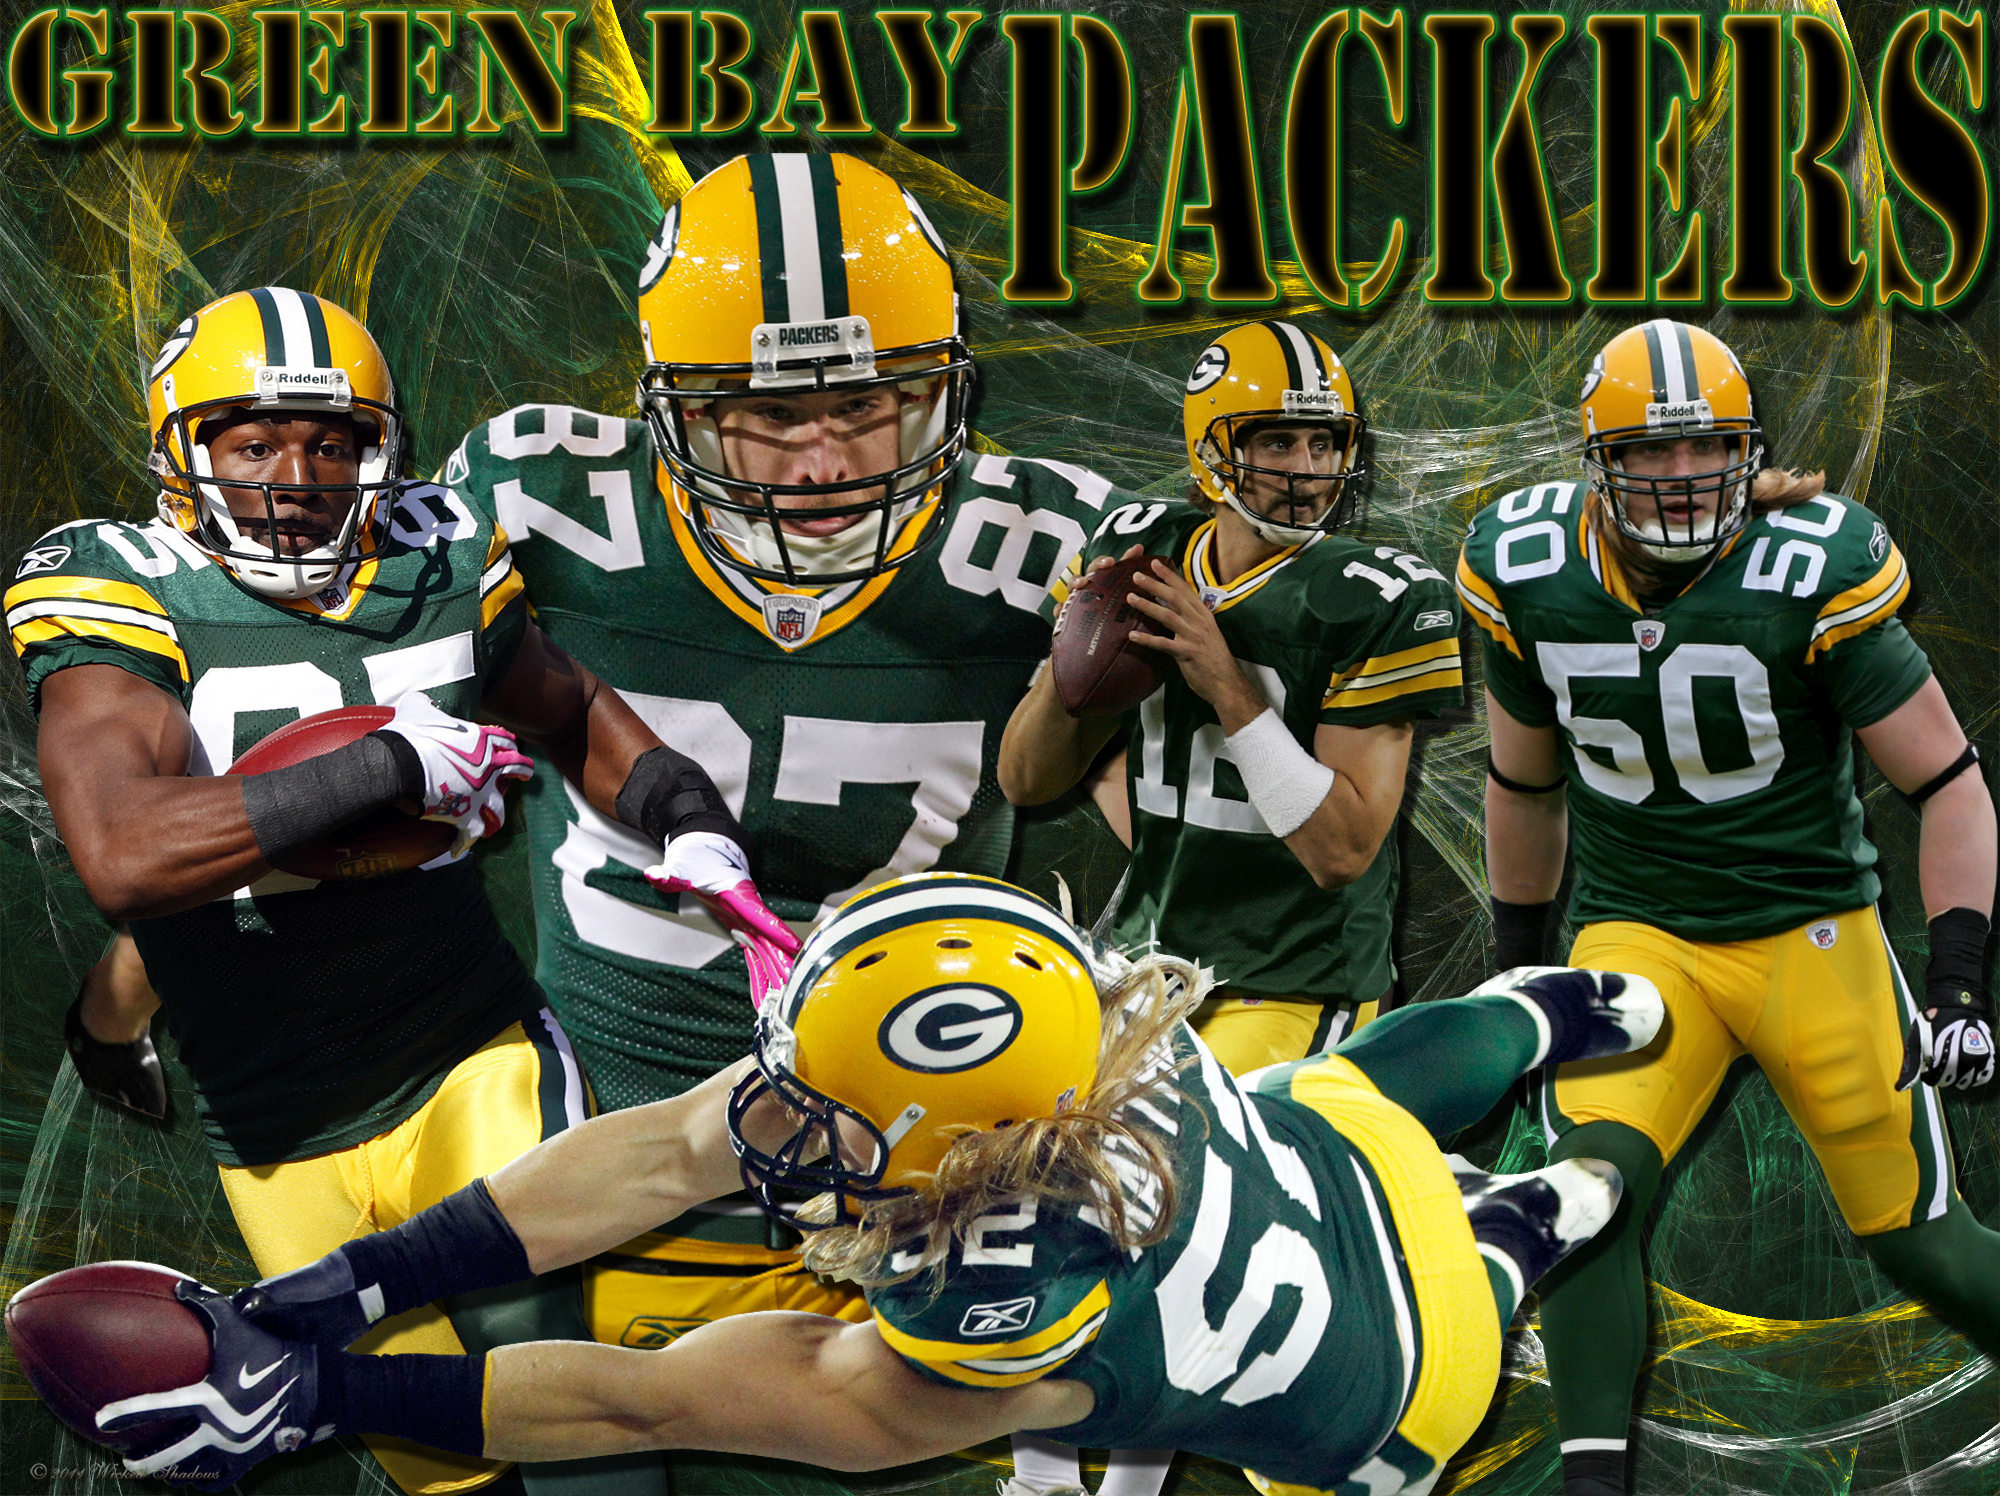 Wallpapers By Wicked Shadows Green Bay Packers Team - Green Bay Packersteam - HD Wallpaper 